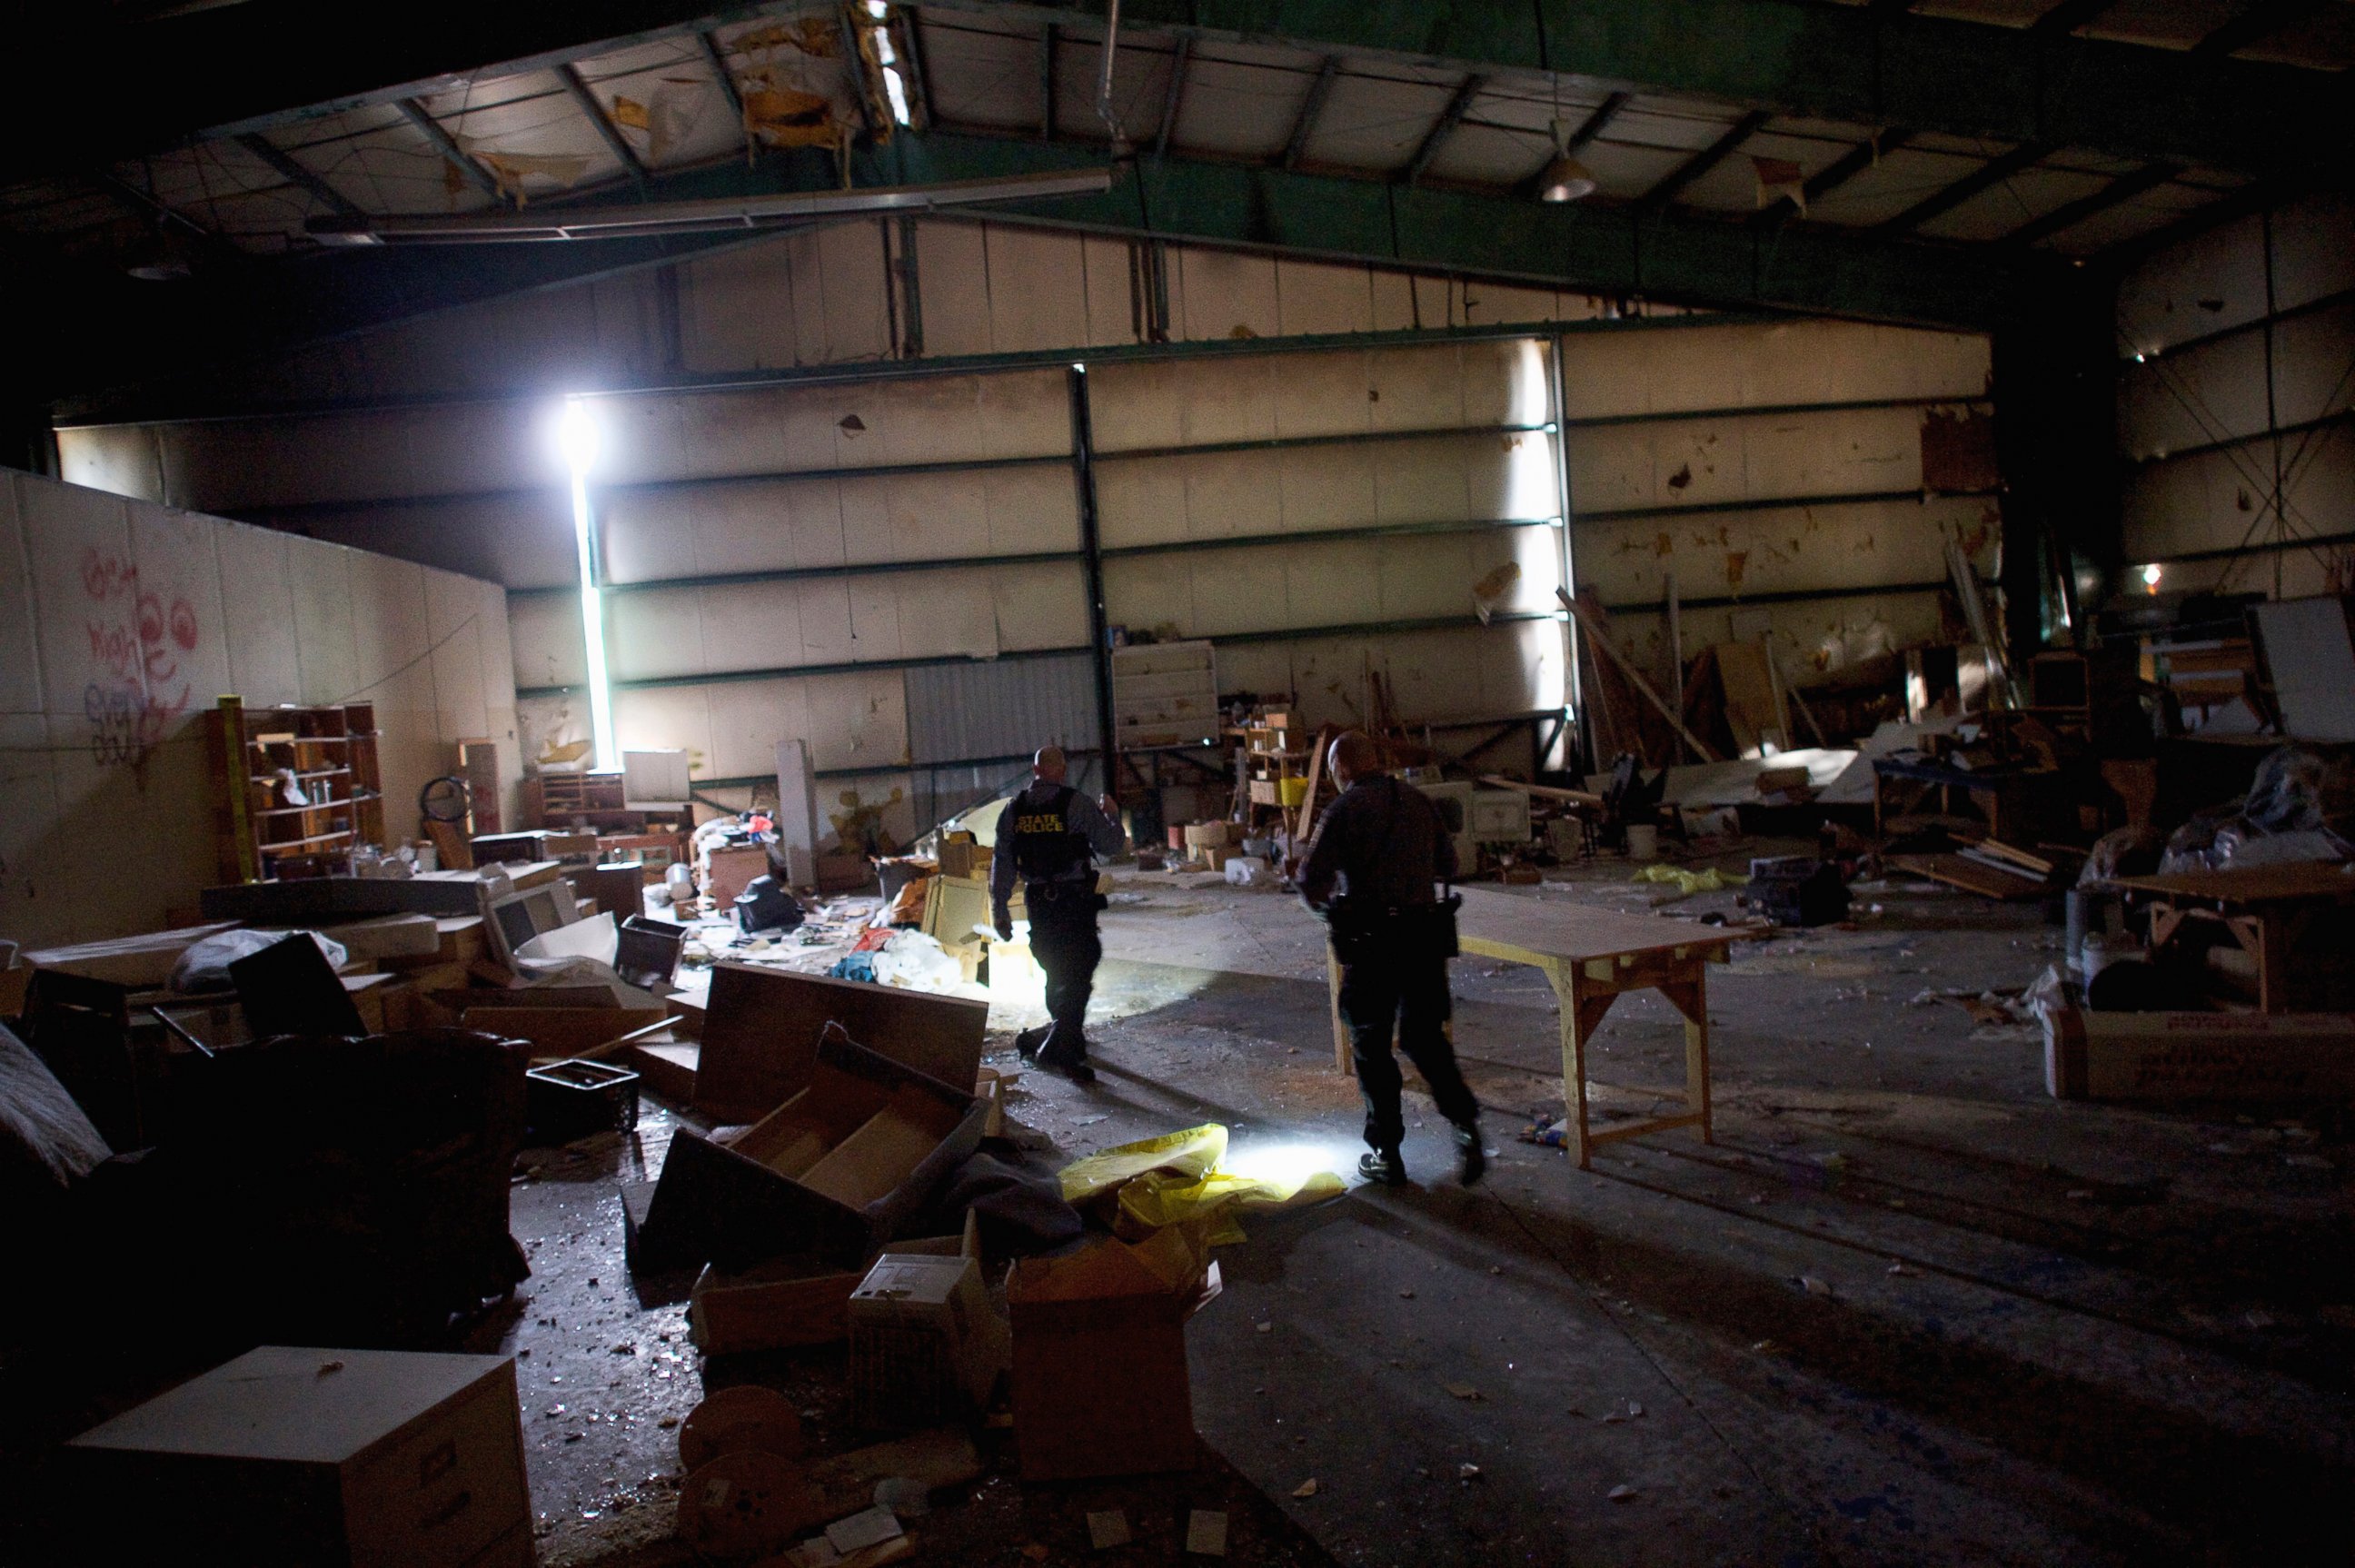 PHOTO: Police officers search the hangar within the abandoned Birchwood Resort, where Eric Frein was caught on Thursday, in Tannersville, Pa., Oct. 31, 2014.